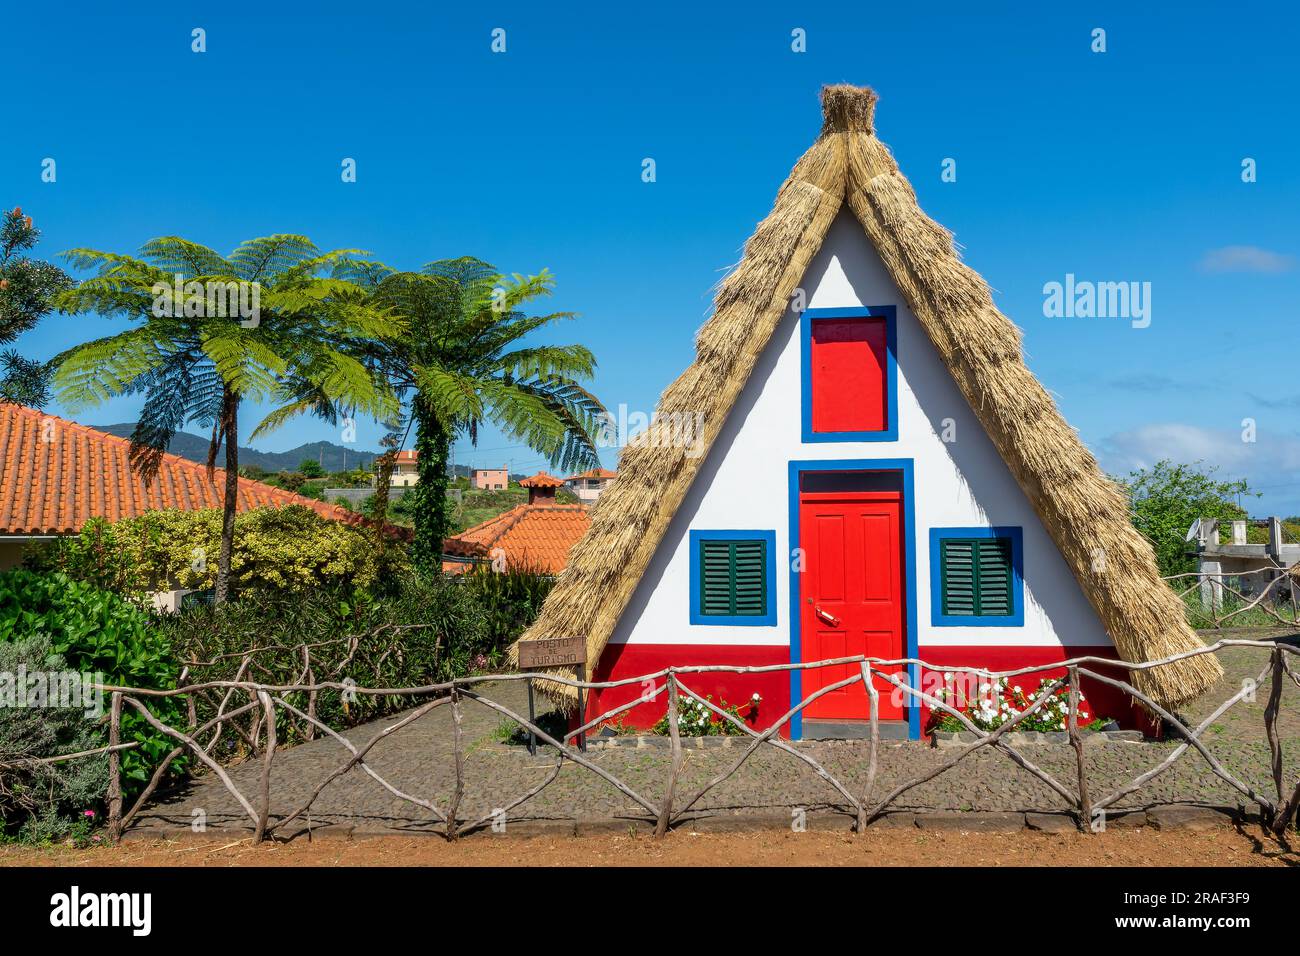 Tourism office in a traditional triangular madeiran house in the island of Madeira, Portugal Stock Photo